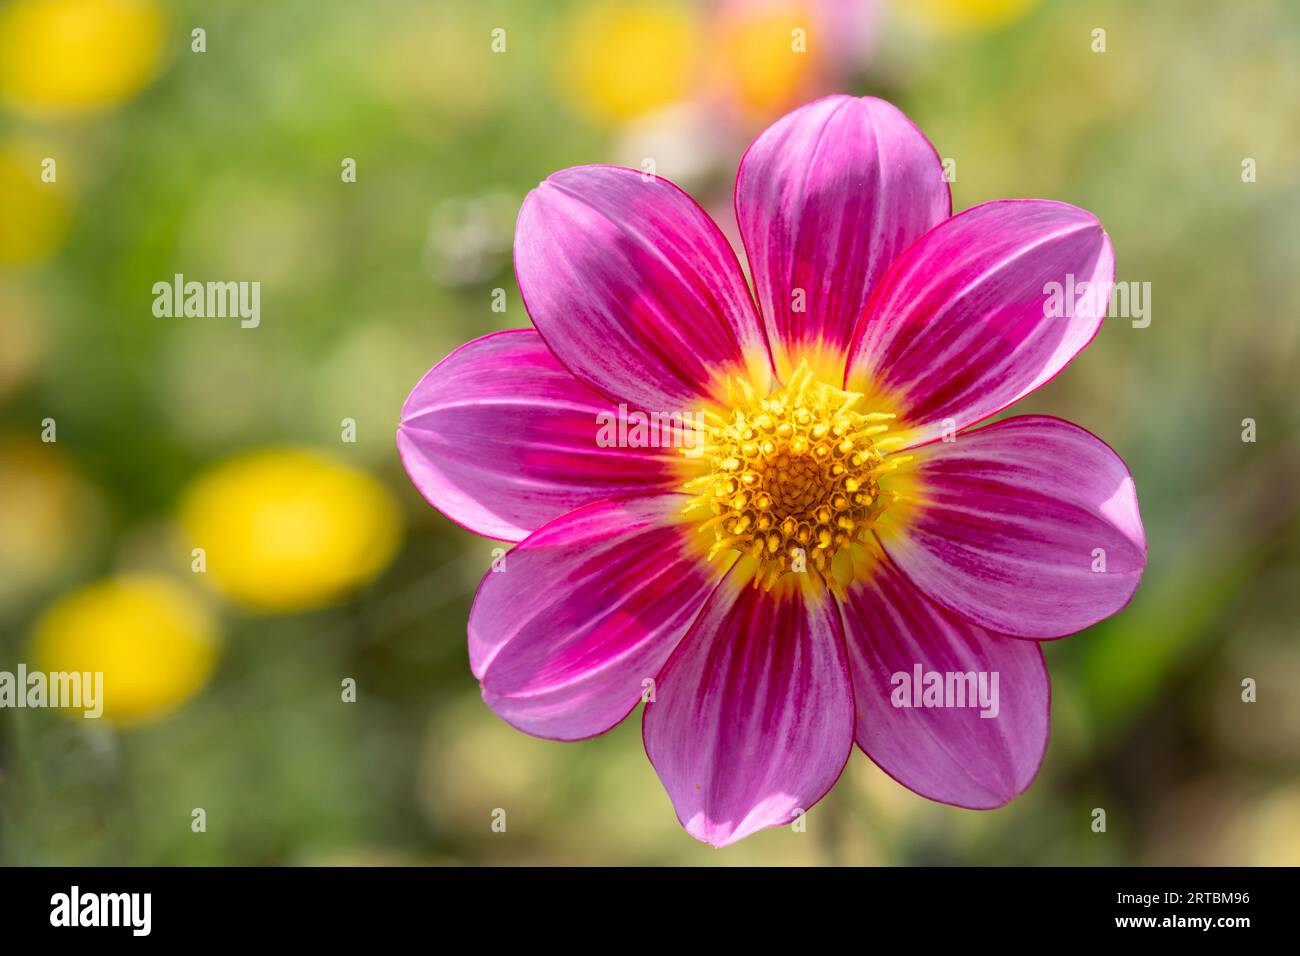 A close up image of a purple single Dahlia flower.The plant is in bloom during a late British summer.There are out of focus blooms in the background Stock Photo